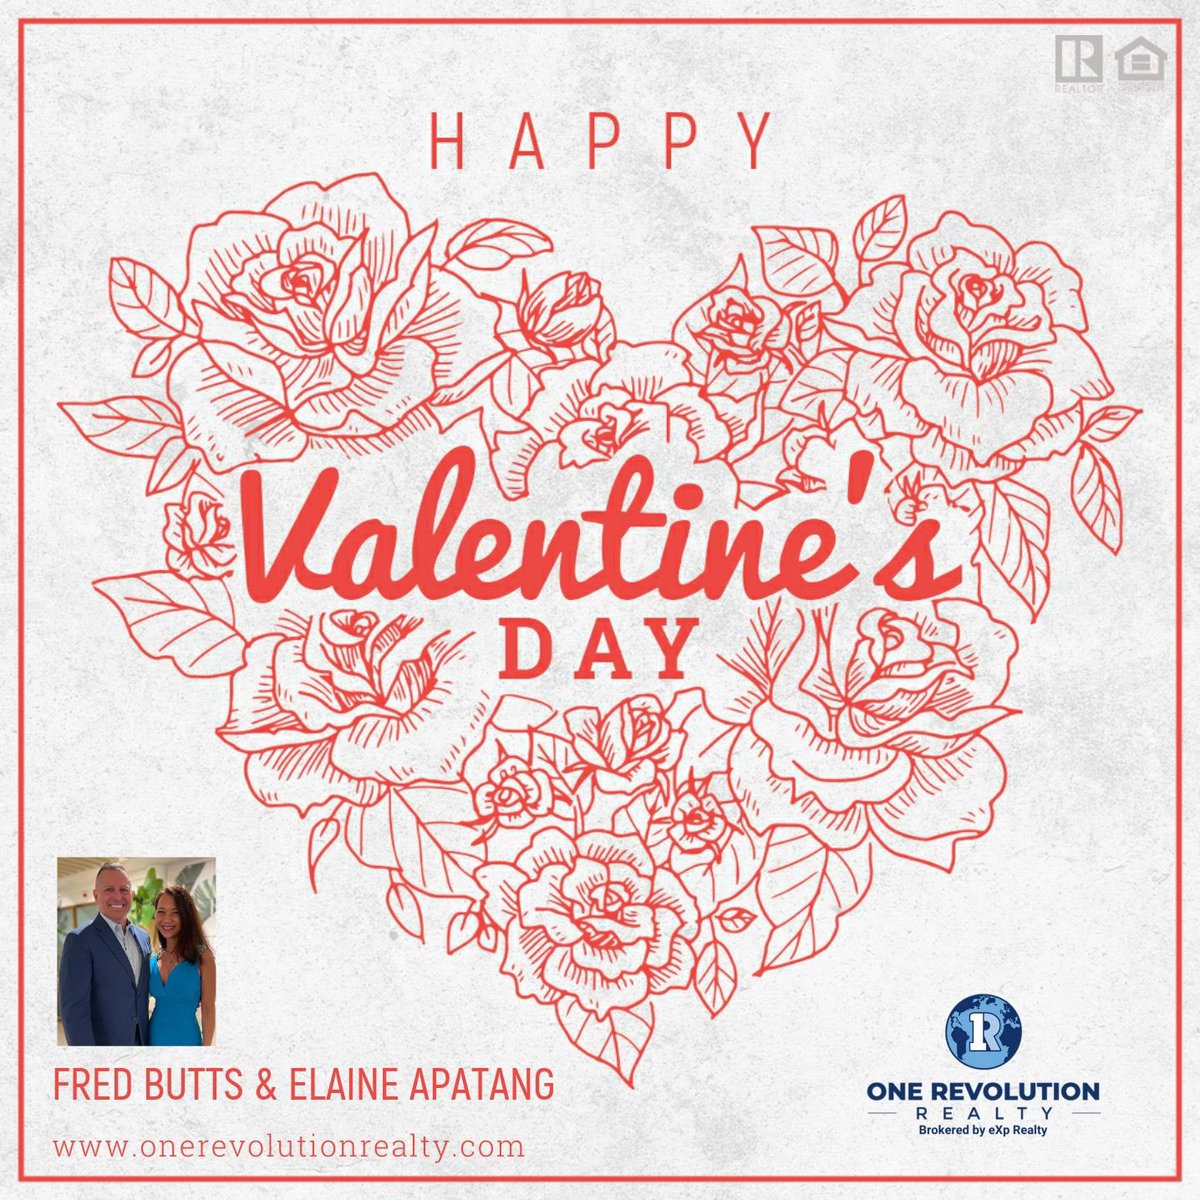 HAPPY VALENTINE'S DAY from Fred and Elaine ❣️
#valentinesday #love #loveyouragents #usa #newhampshire #nhrealestate #seacoastnh #portsmouthnh #mainerealestate #realestate #onerevolutionrealty #fredbutts #realtor #realestateagent #listingagent #buyersagent #exprealty #wecanhelp